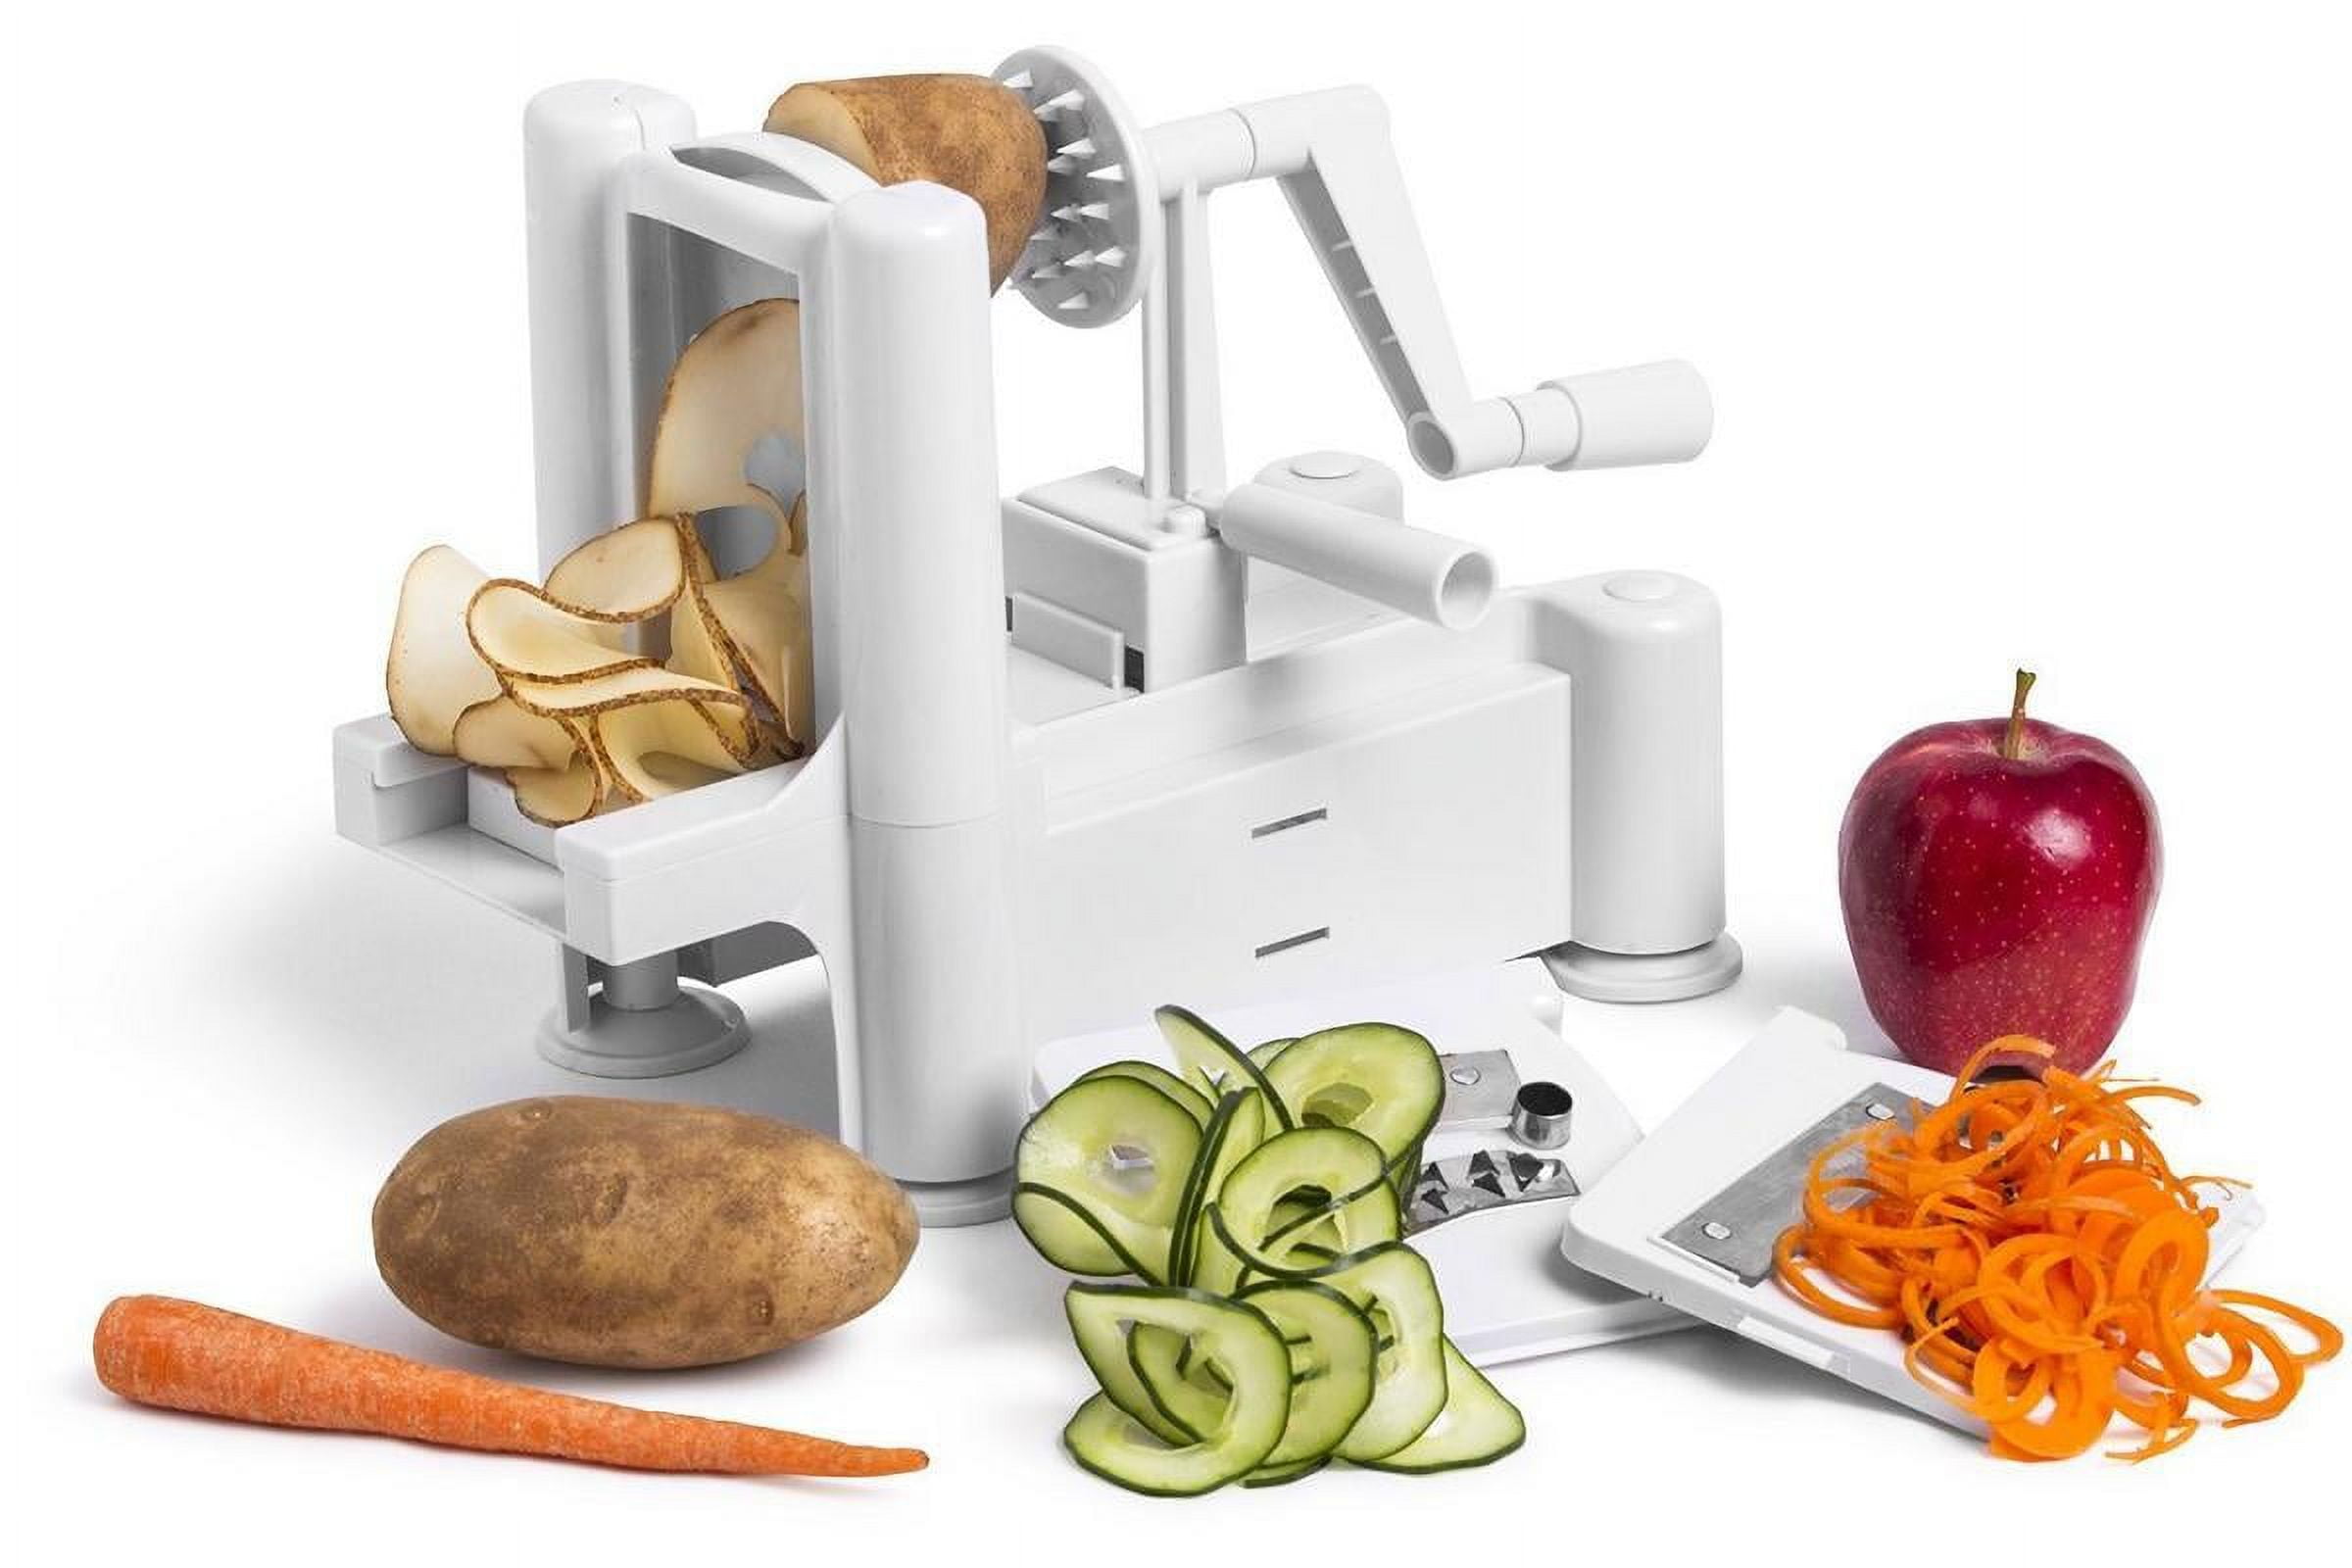 ICO 4-Blade Spiralizer Vegetable Slicer and Curly Fries Maker with 3 Interchangeable Blades and 1 Built-in, Black